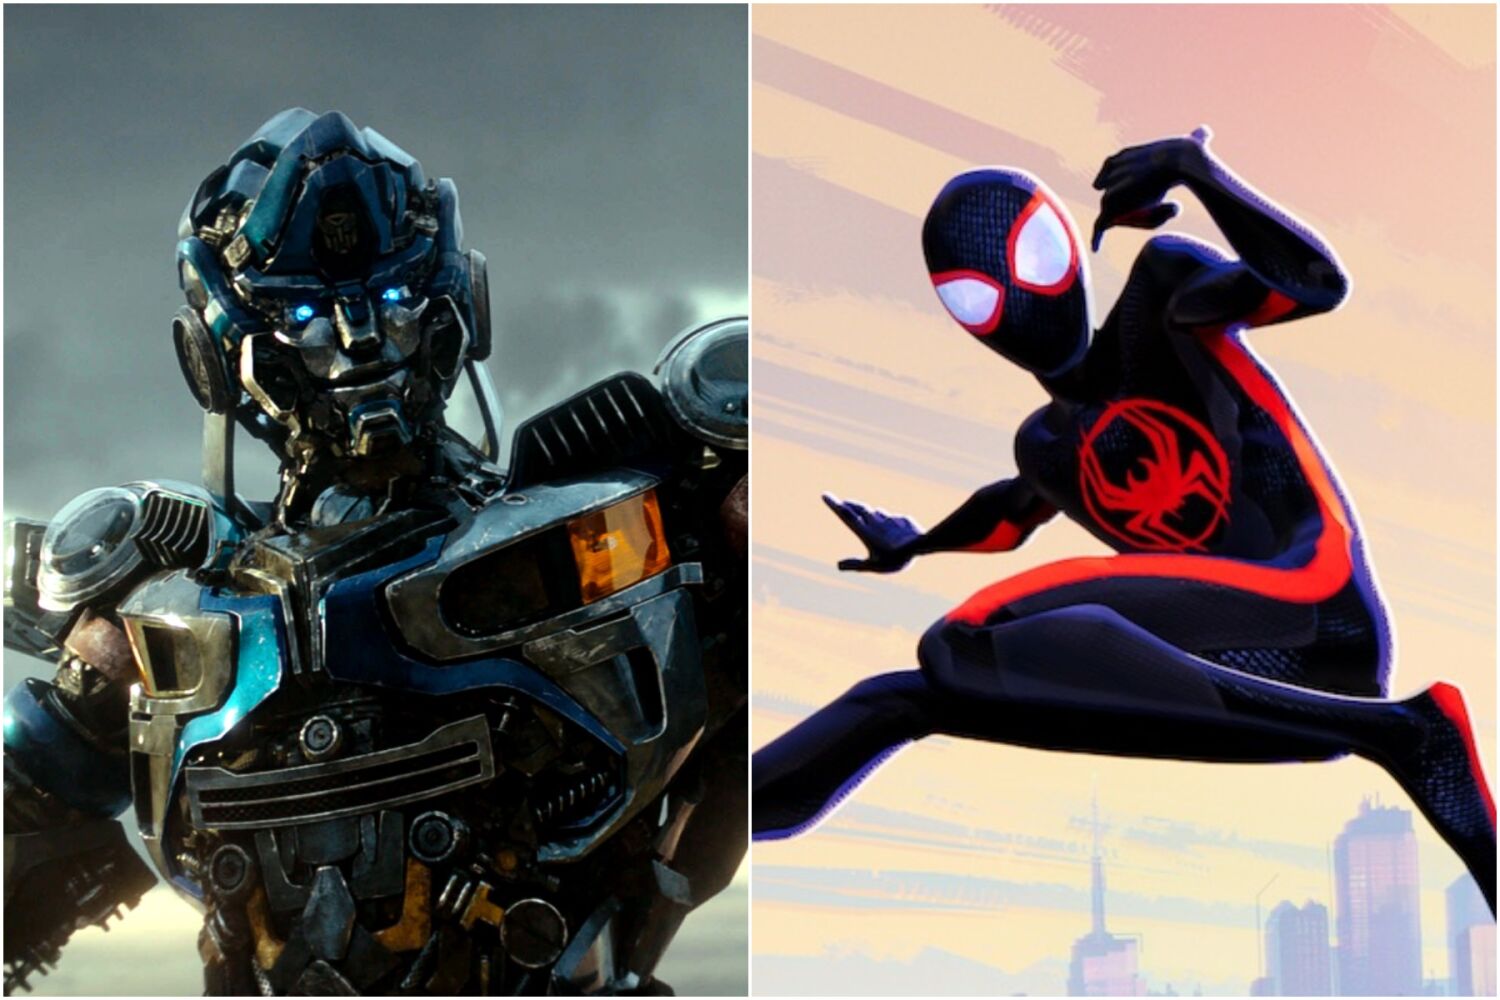 'Transformers' narrowly eclipses 'Spider-Man' at the domestic box office